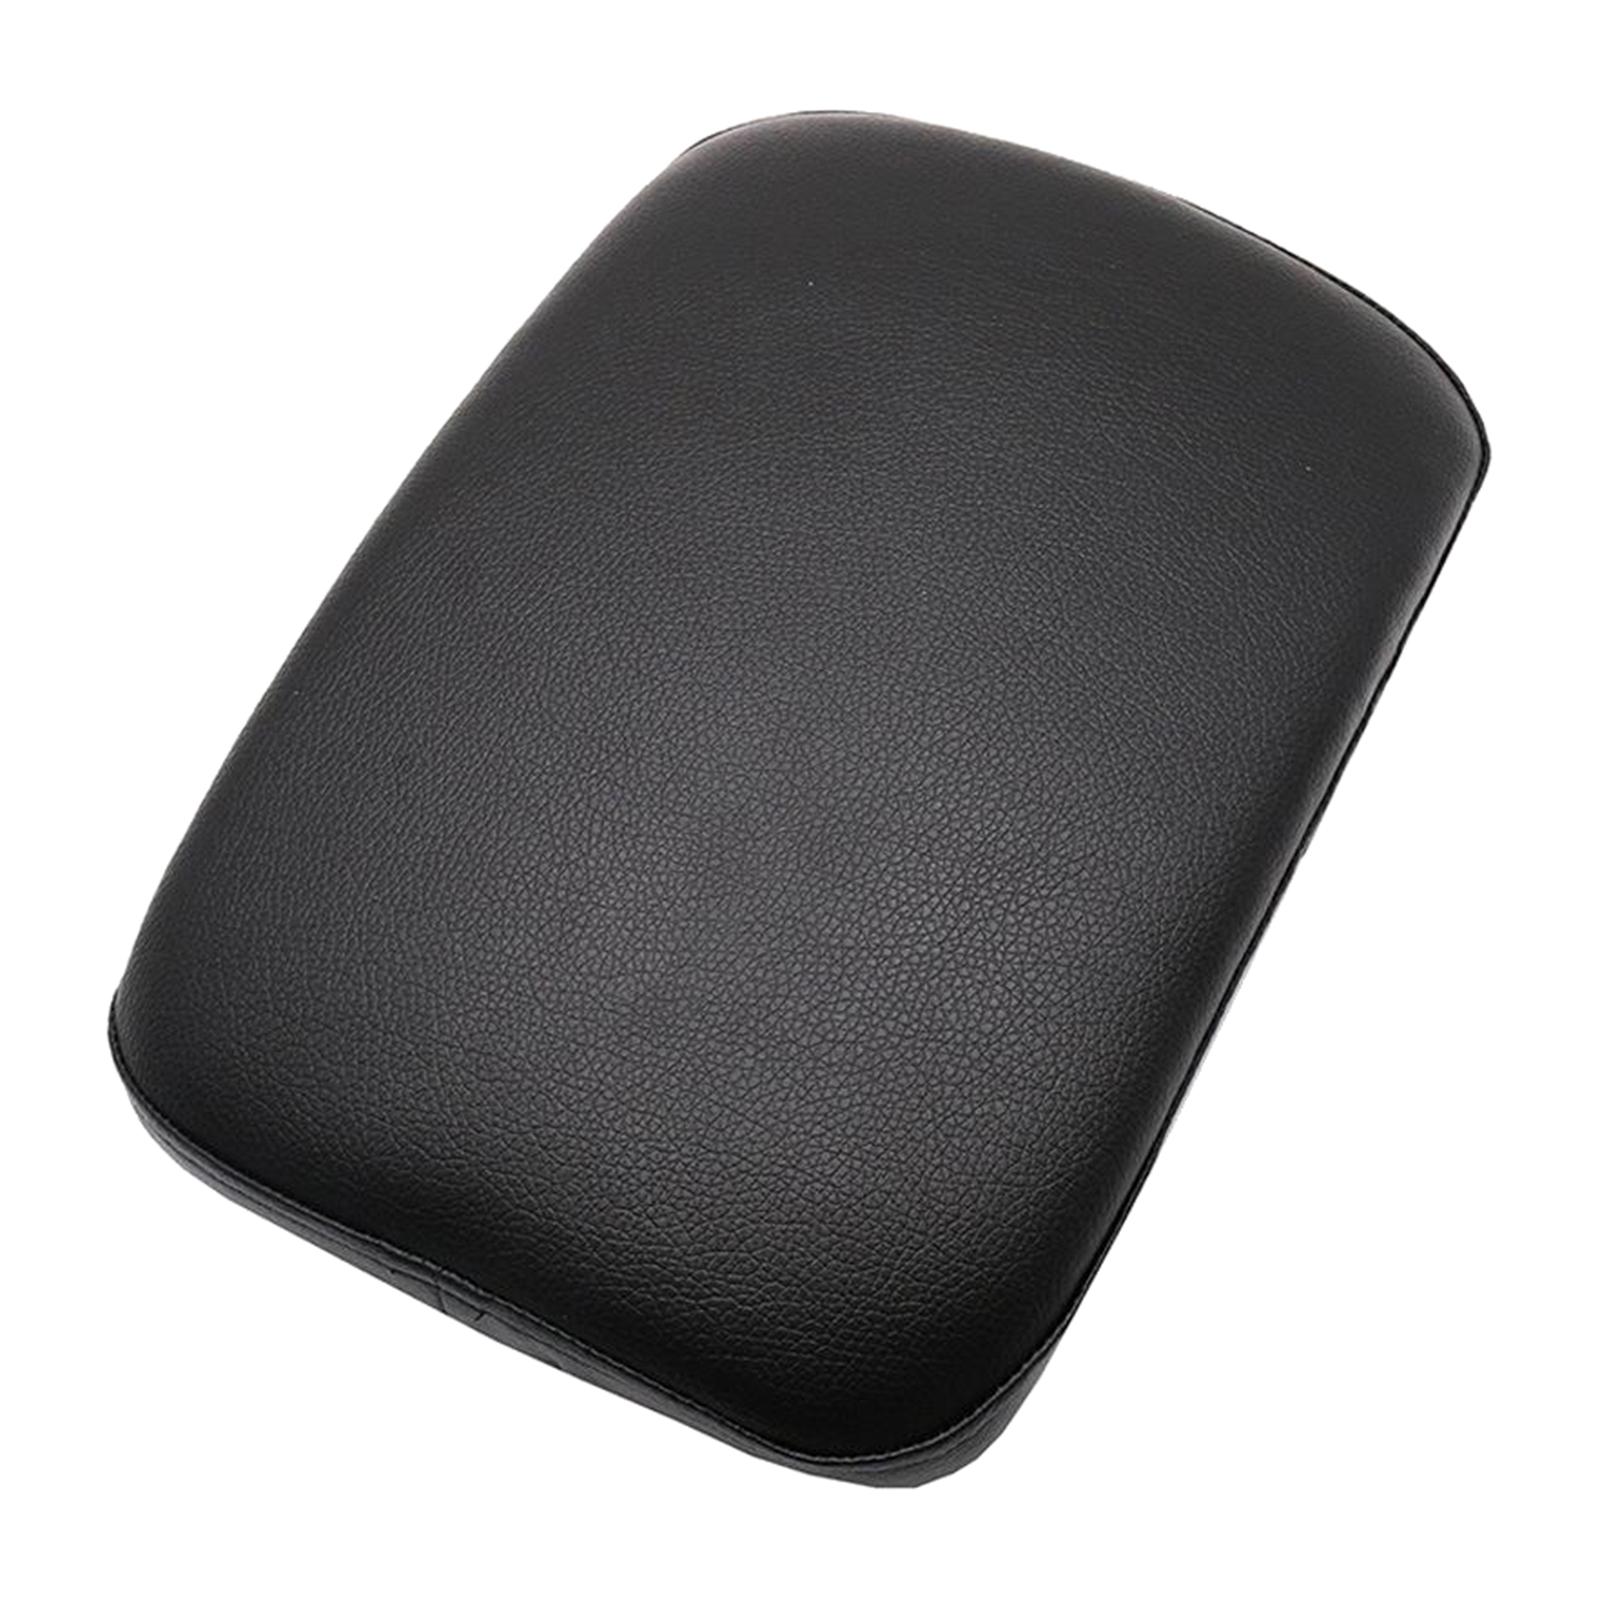 Rear Pillion Passenger Pad Seat for Harley XL883 XL1200 X48 X72,Spare Parts,Comfortable